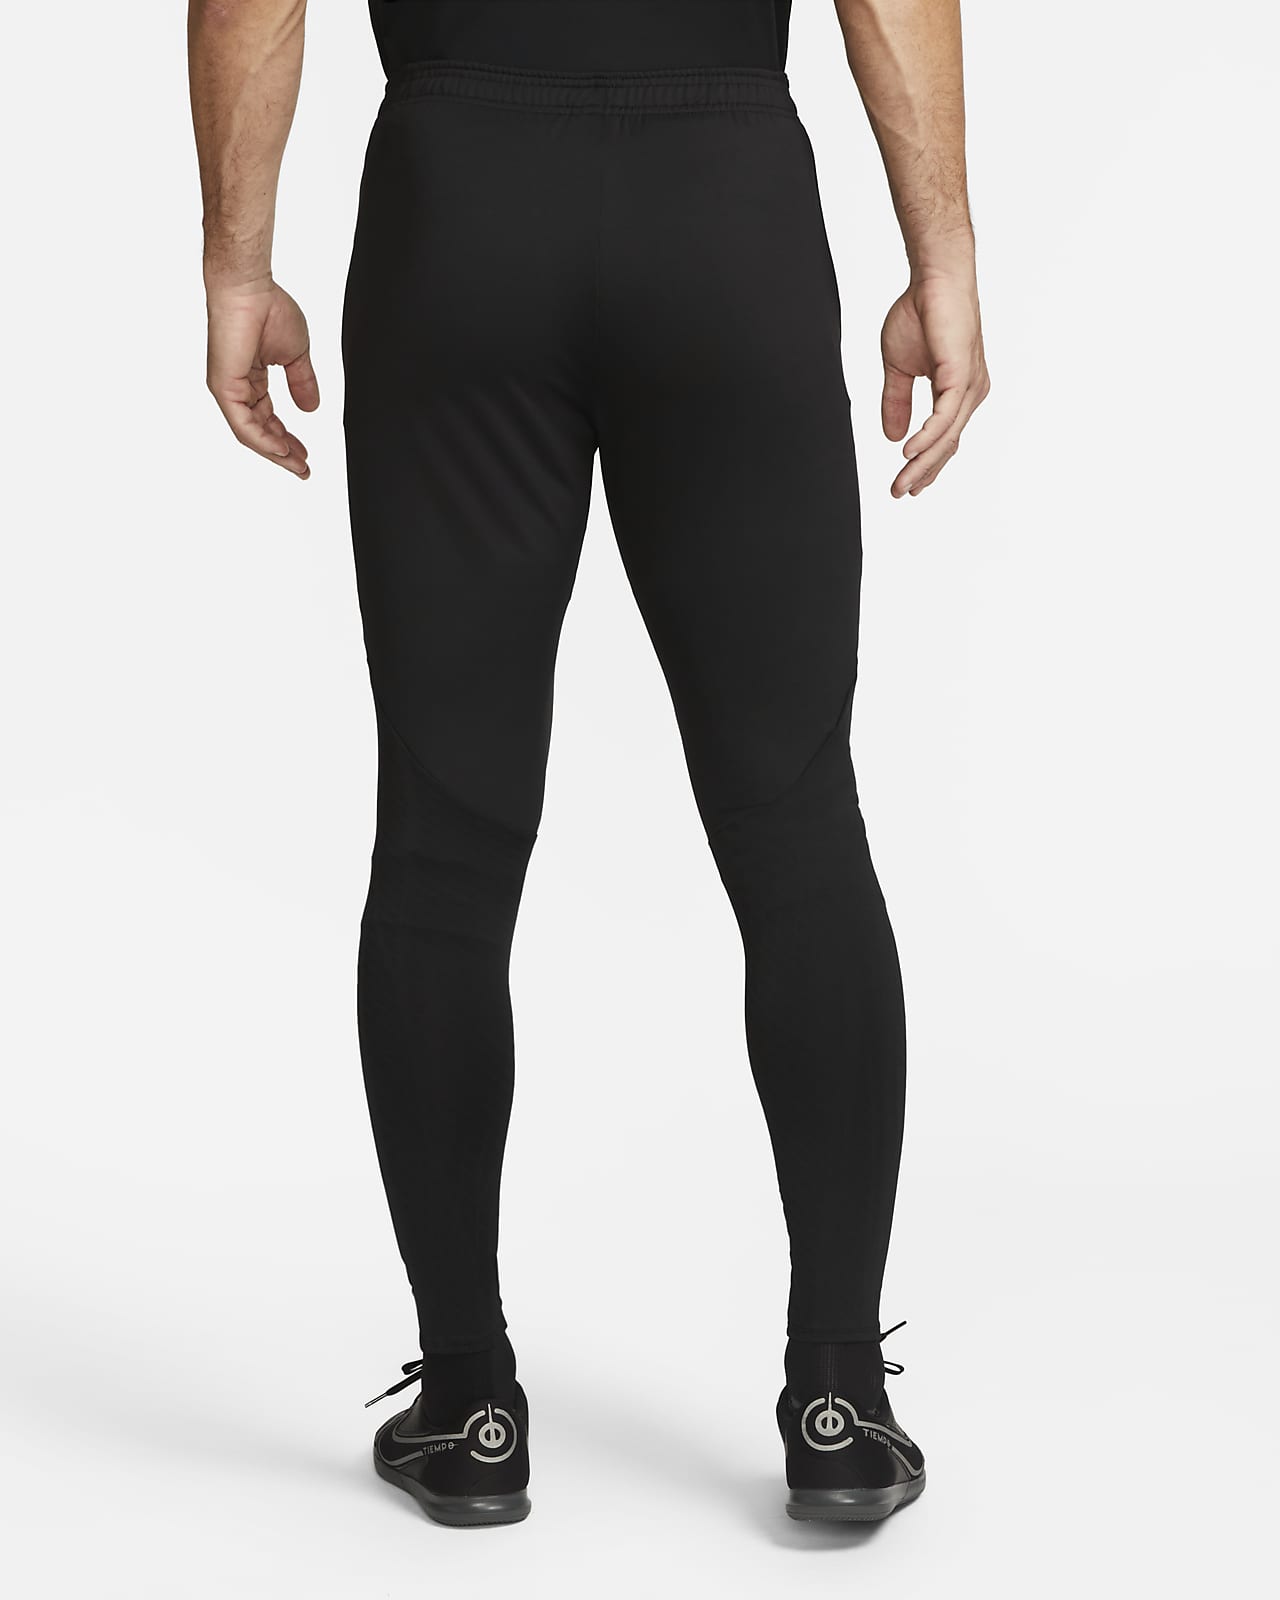 Nike Pro Hyperrecovery Black Training Compression Tights Men's NWT | eBay